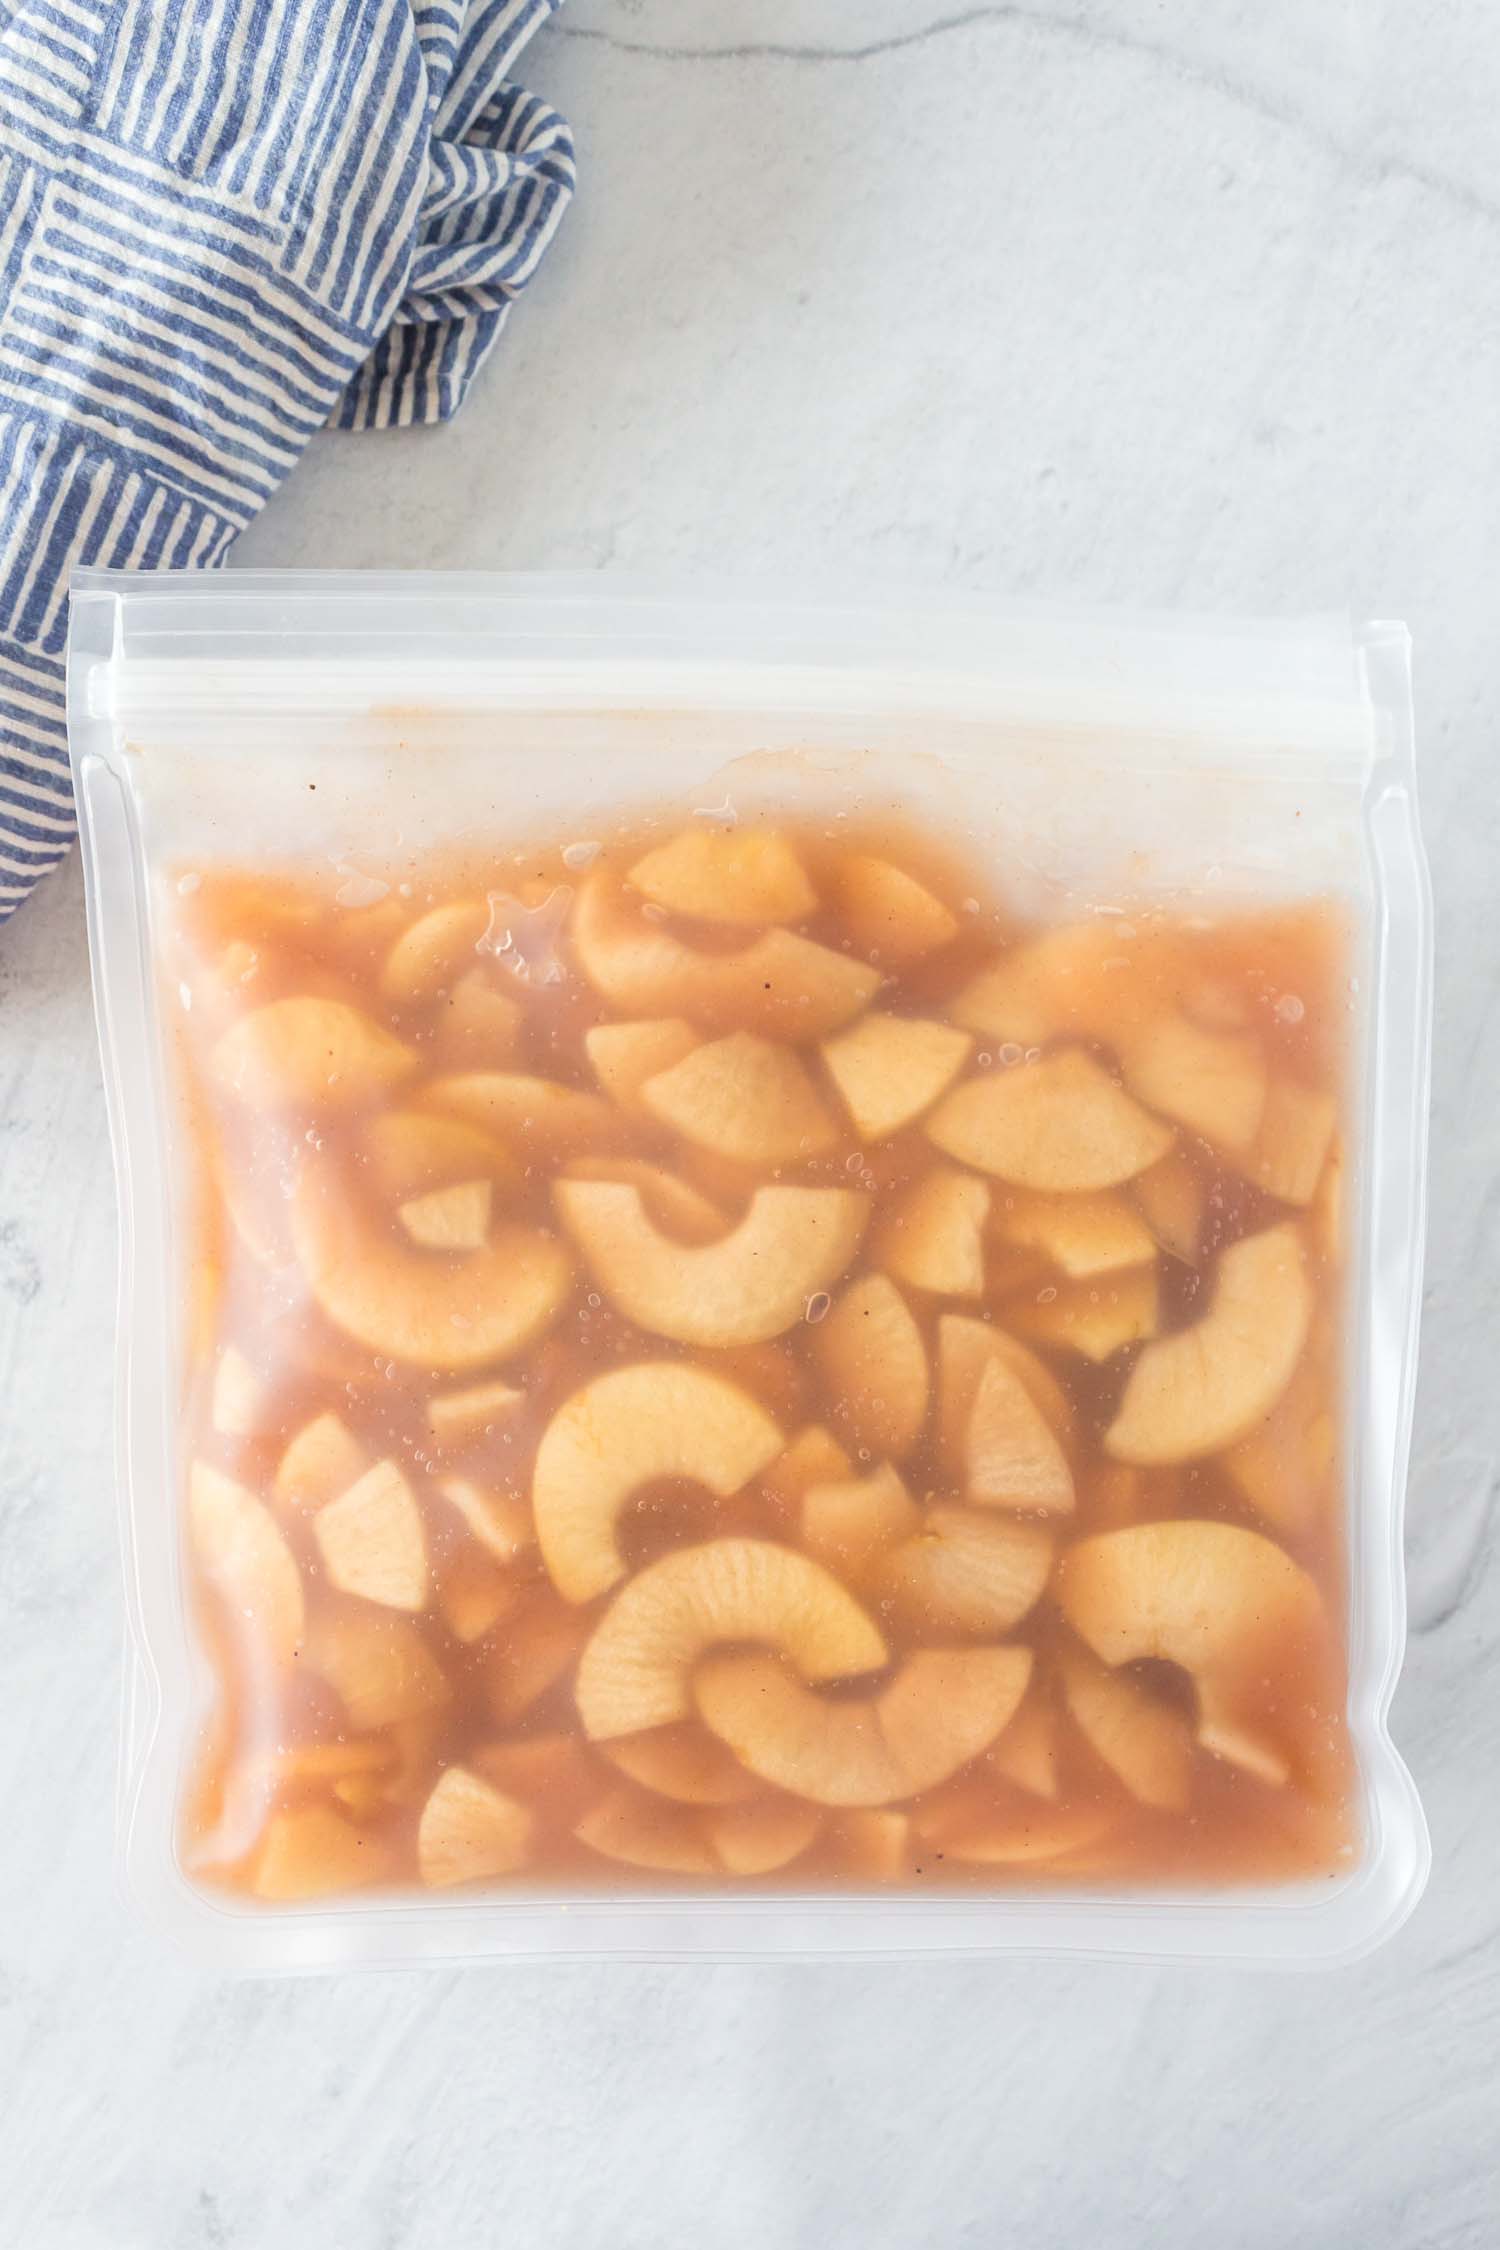 A resealable freezer bag full of apple pie filling.